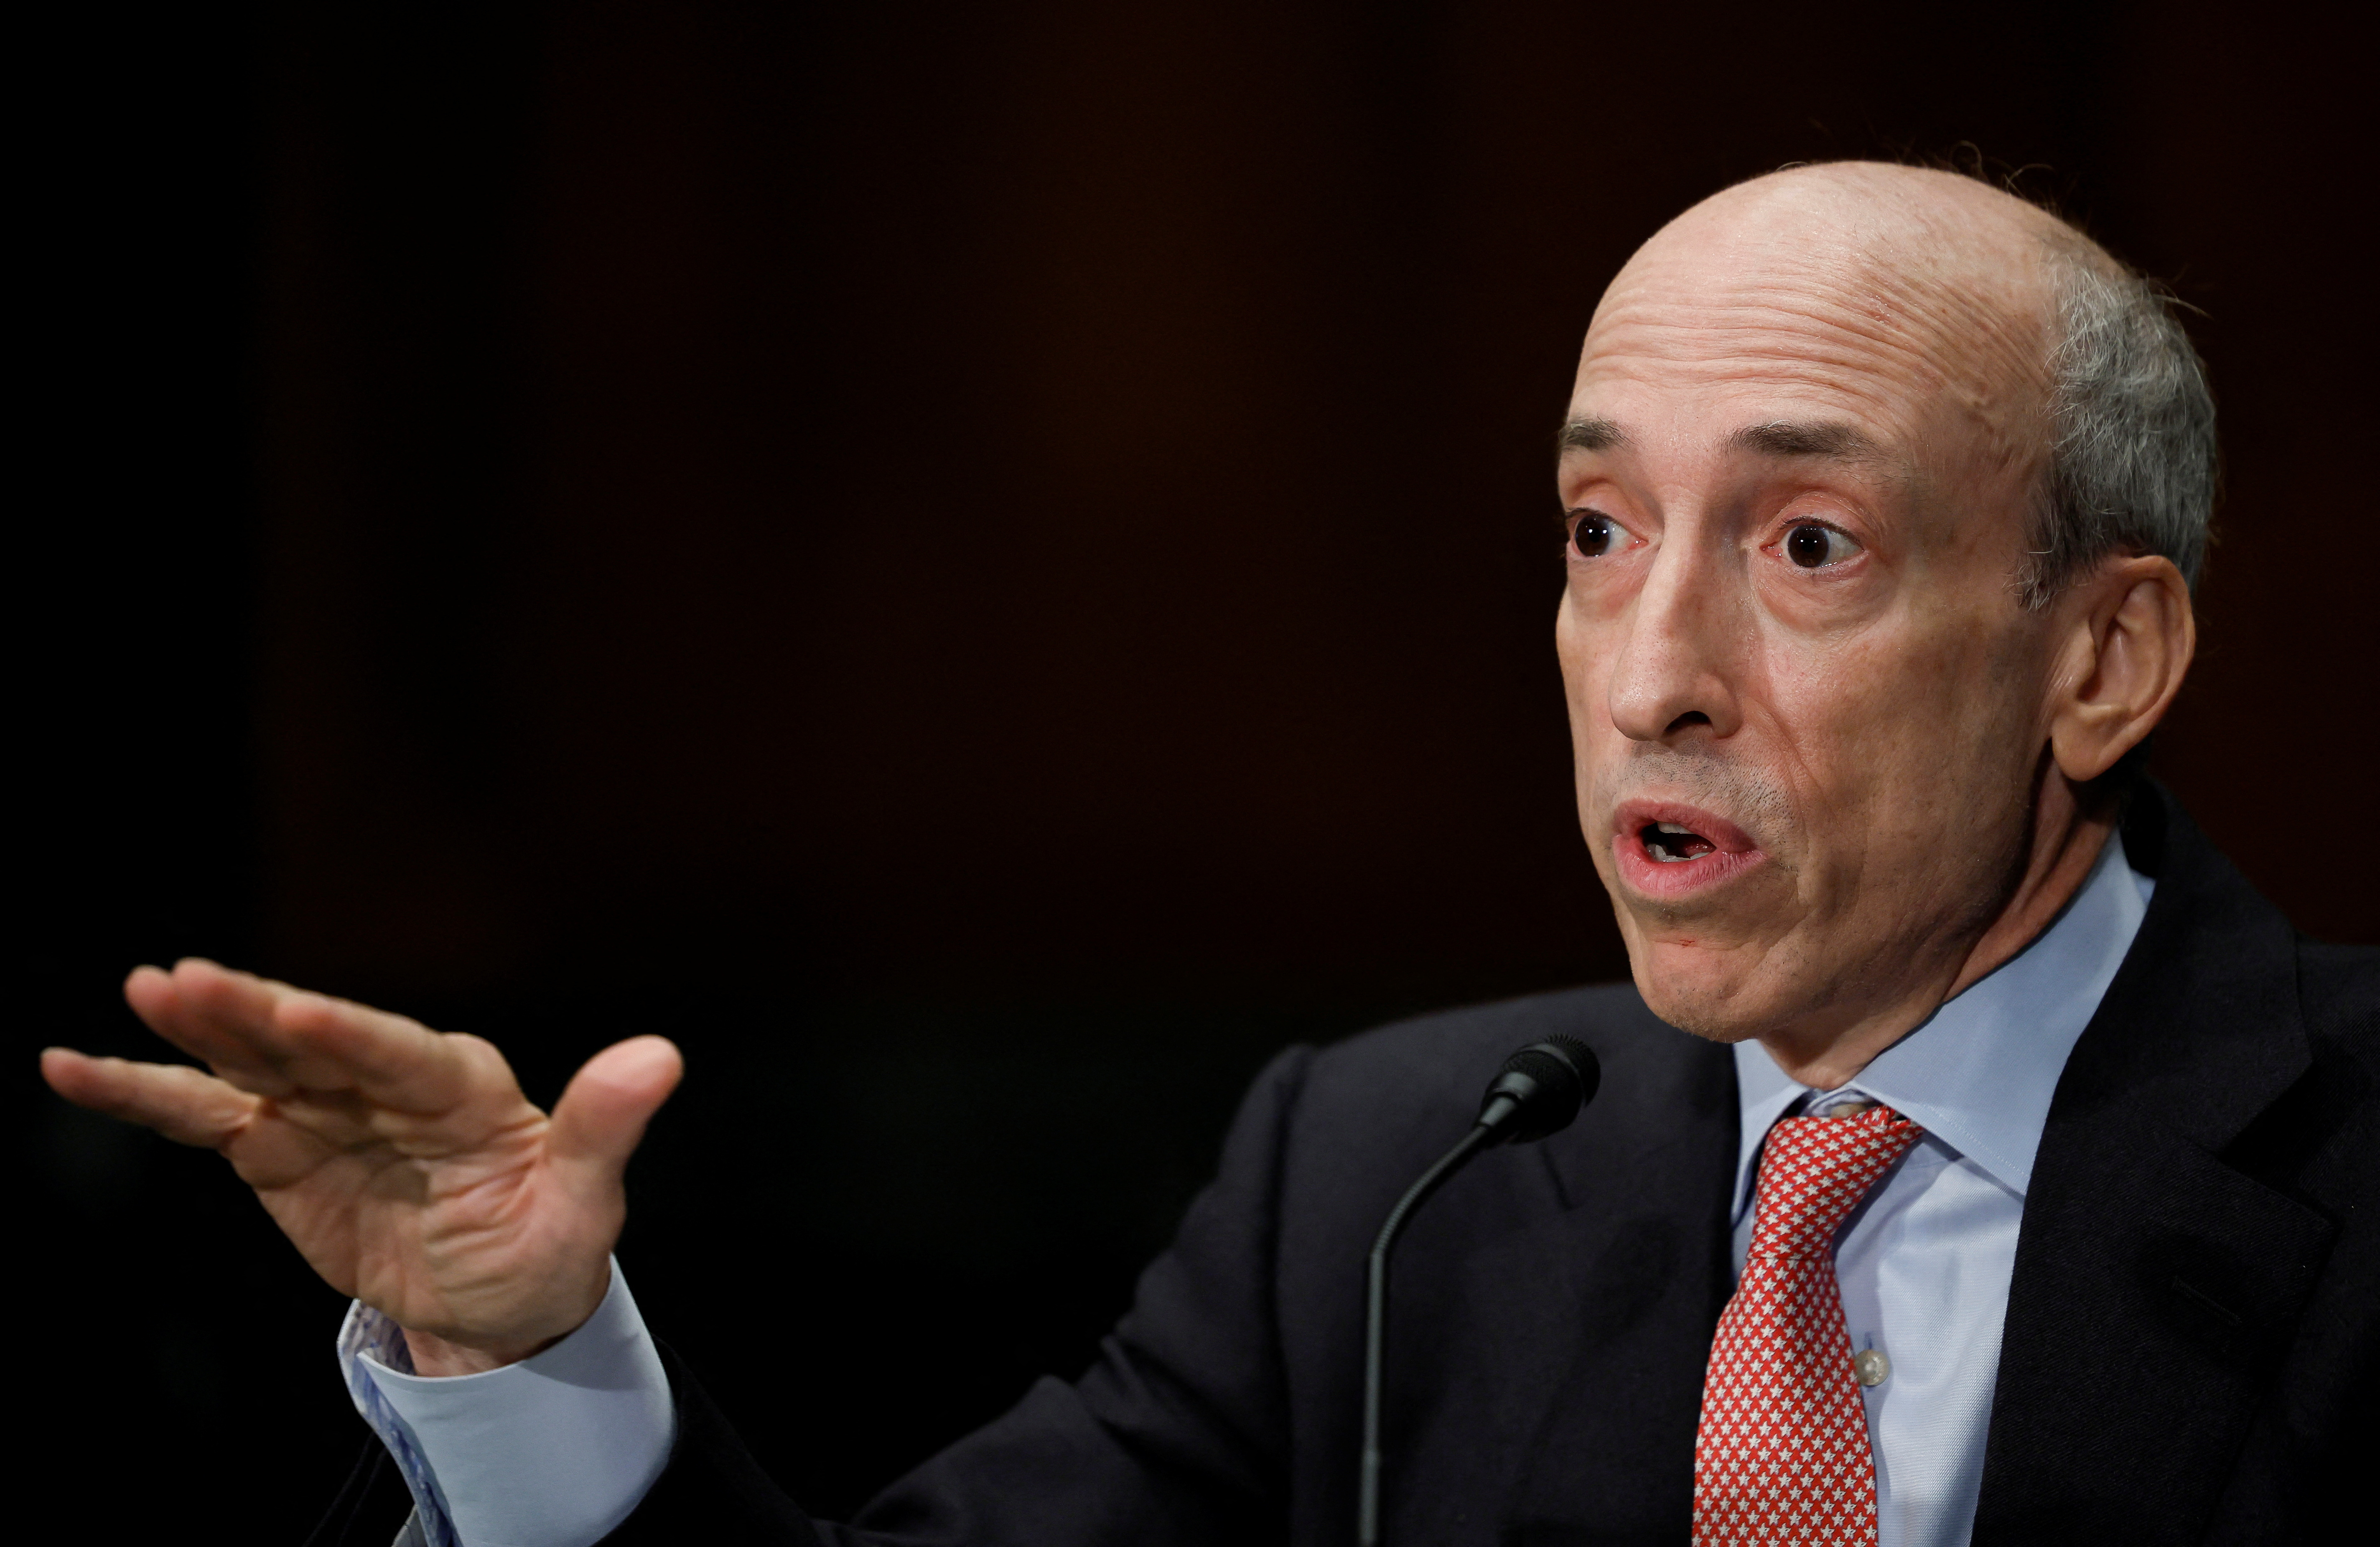 U.S. Securities and Exchange Commission (SEC) Chairman Gary Gensler testifies on Capitol Hill in Washington